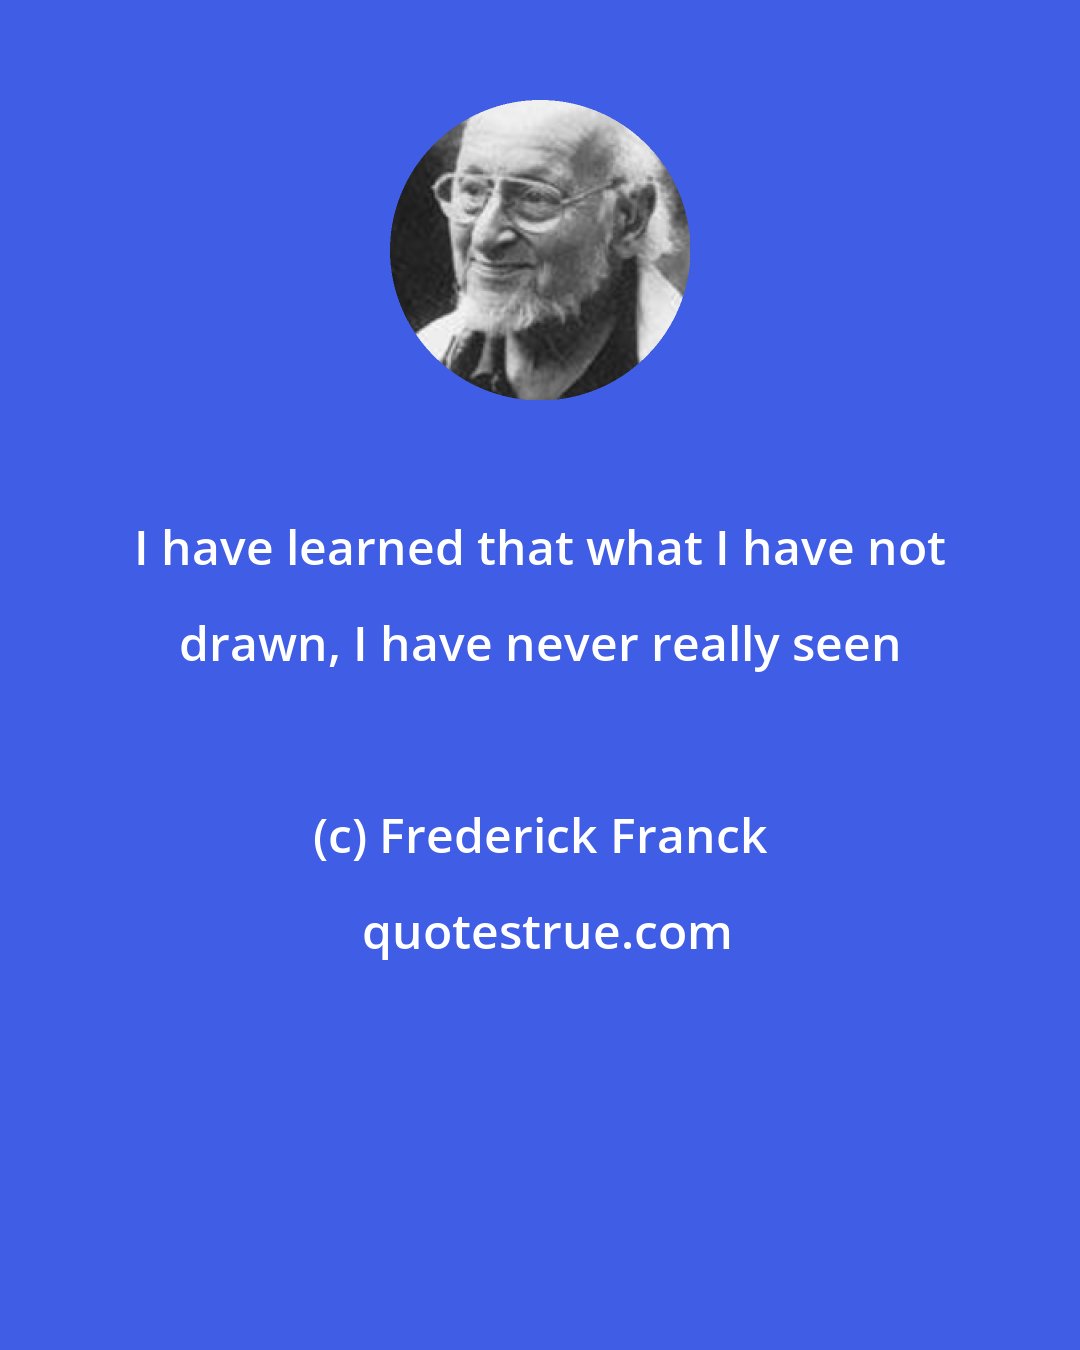 Frederick Franck: I have learned that what I have not drawn, I have never really seen